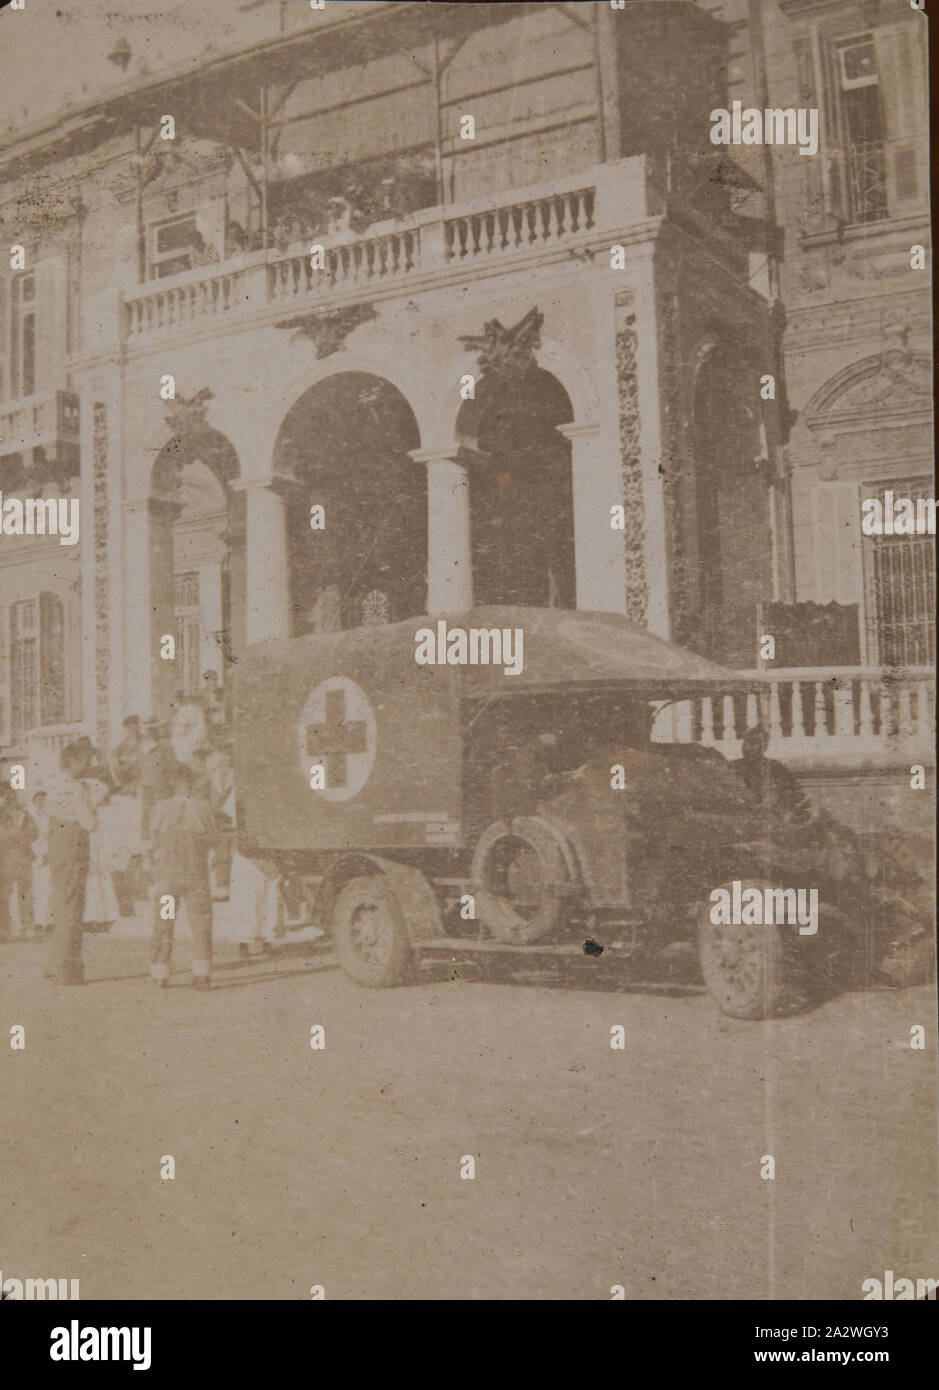 Photograph - 'Lady de Walden Hospital', Alexandria, Egypt, World War I, 1915-1918, Photograph identified as the Lady de Walden Hospital in Alexandria, Egypt. It was established as a convalecsent hospital by Margherita, Lady Howard de Walden, in 1915 during World War I, in response to a shortage of hospitals and nurses. Her husband, Tommy Scott-Ellis, 8th Lord Howard de Walden, was Second-in-Command of the Westminster Dragoons, and was posted to Alexandria. She rented Maison Stock Photo